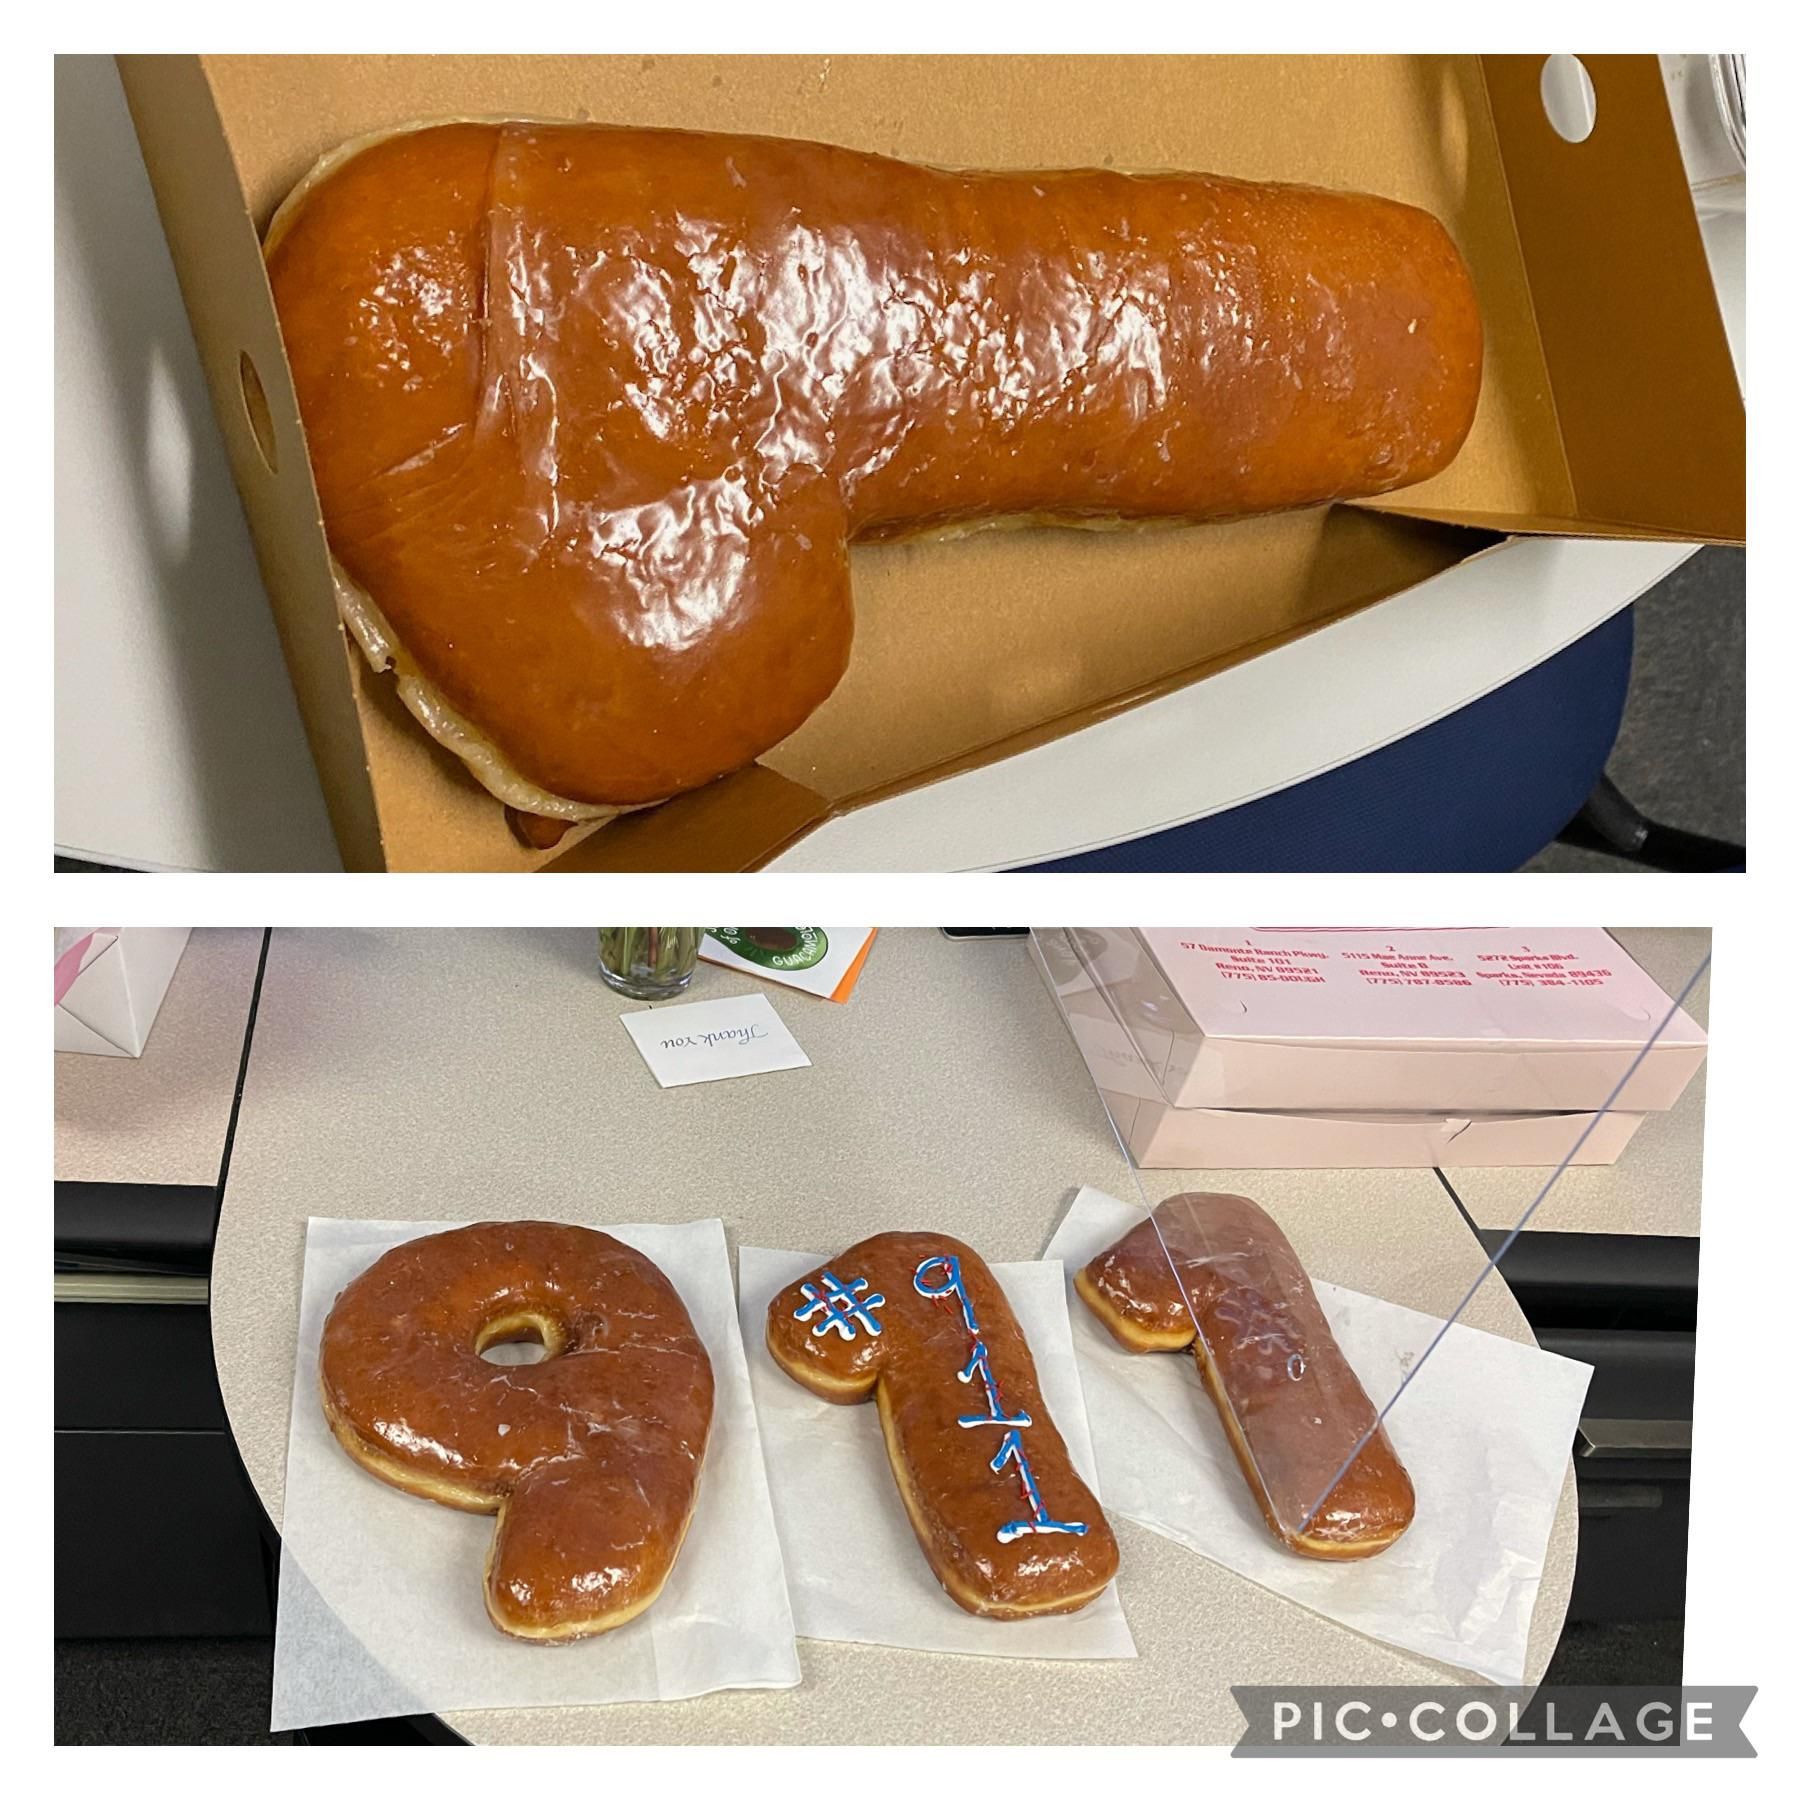 I’m a 911 Dispatcher, and it is public safety telecommunicator week. HR got us giant “911” shaped donuts. We were all a little concerned when we opened the first box.